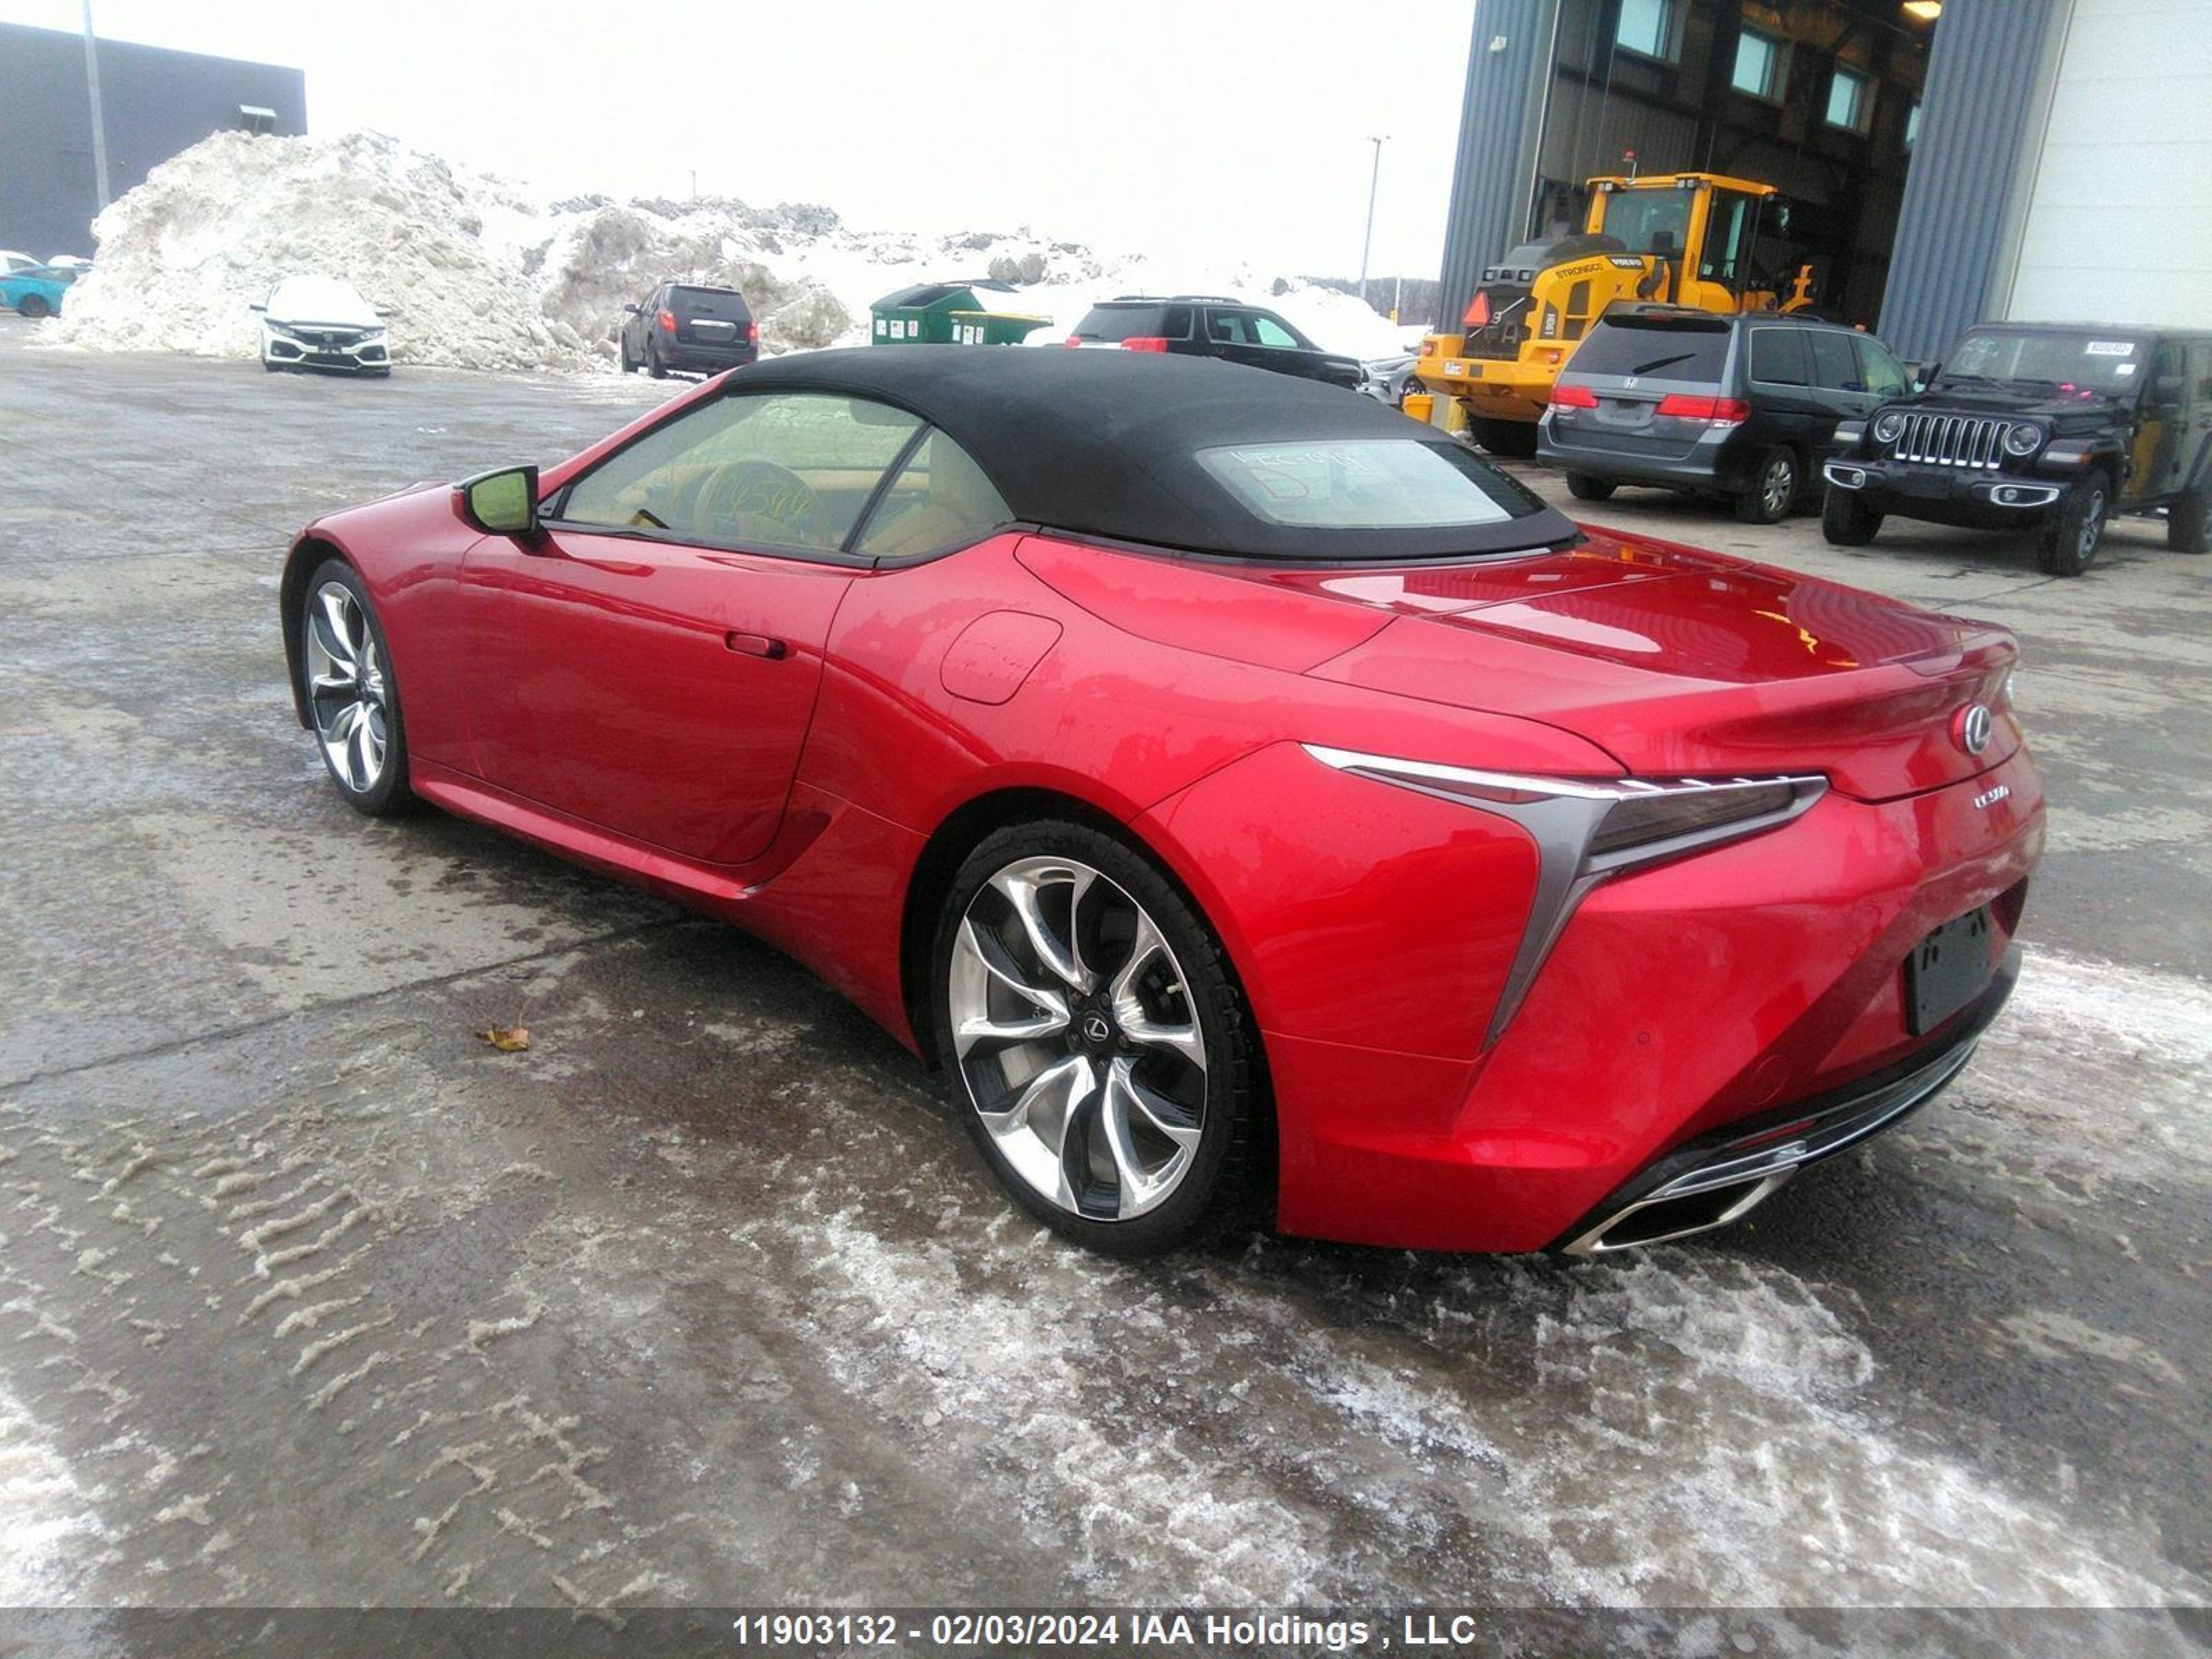 vin: JTHMPAAY0NA104544 JTHMPAAY0NA104544 2022 lexus lc 5000 for Sale in h7b0a3, 2000 Leopold-Hamelin , Laval, Ontario, USA